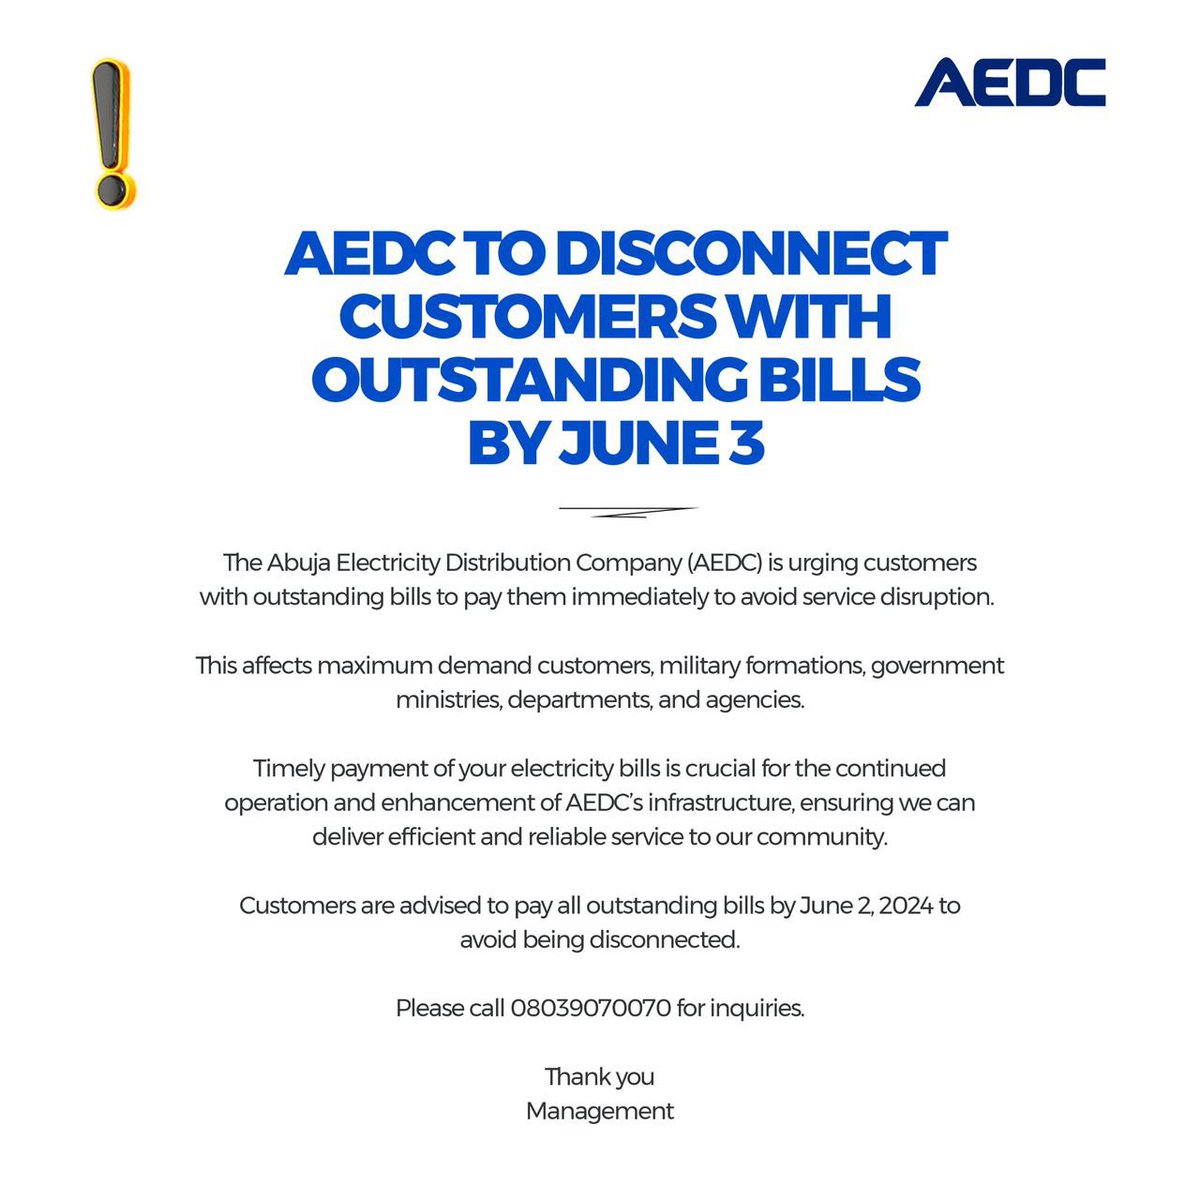 June 3rd is the disconnection date for AEDC to disrupt electricity upon nonpayment of April 2024 bills by all Maximum Demand Customers and MDAs, which is backed up by NERC. #PayYourBills #AEDC